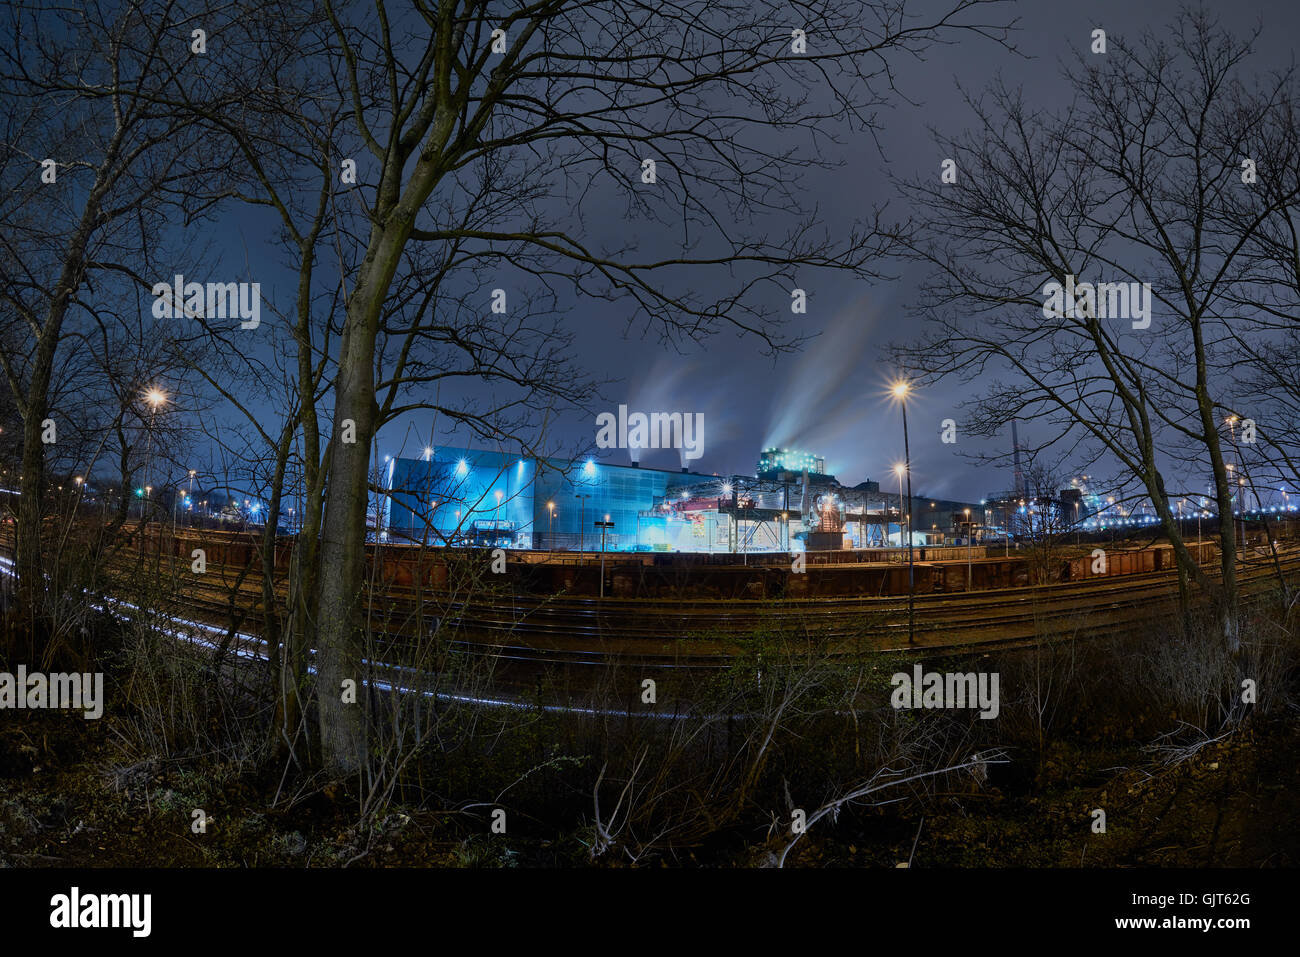 Steelplant in Duisburg, Germany, at night with trees and railways in the front - surreal scenery Stock Photo